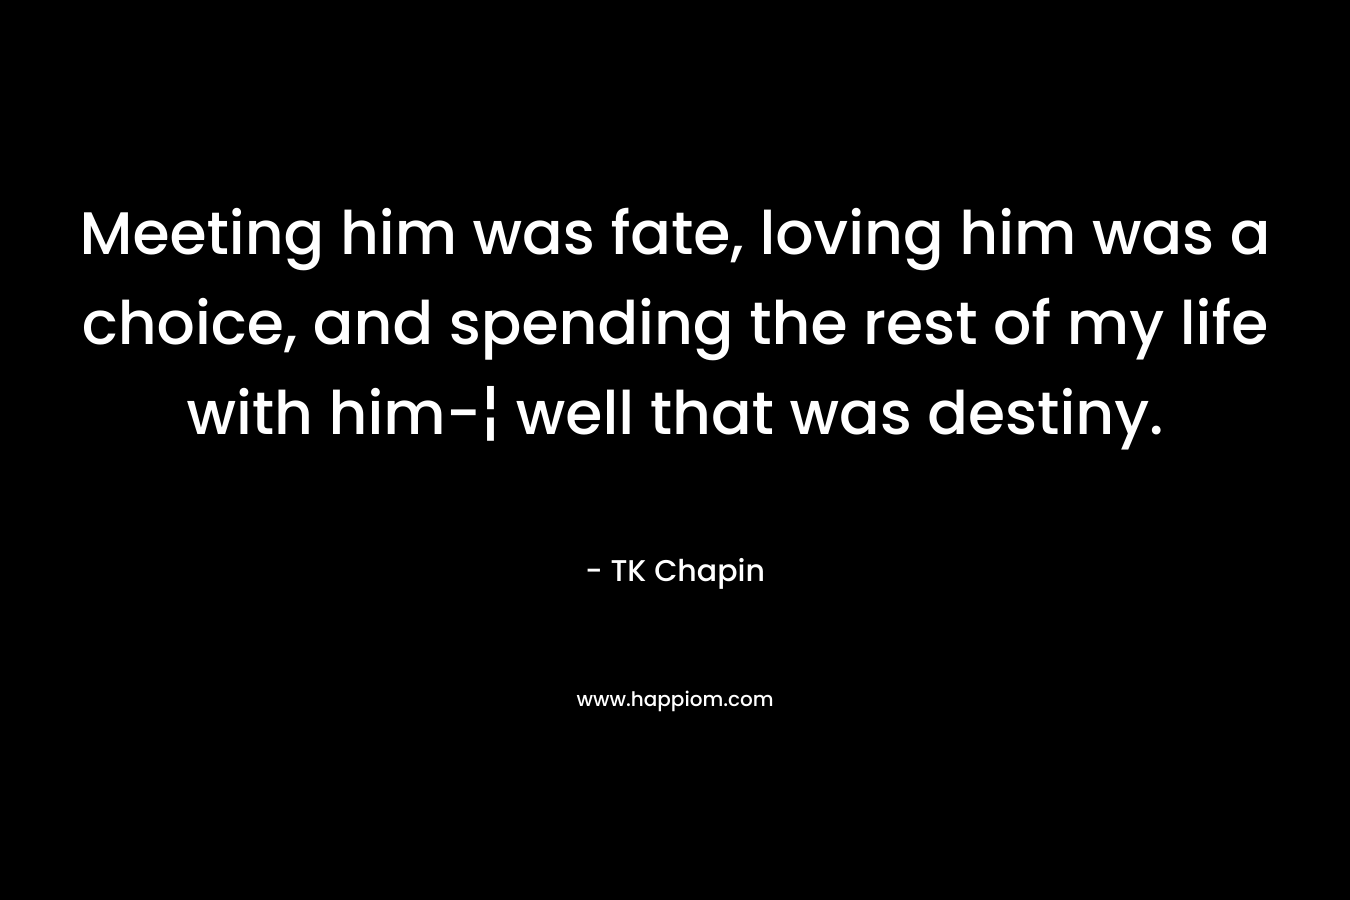 Meeting him was fate, loving him was a choice, and spending the rest of my life with him-¦ well that was destiny. – TK Chapin